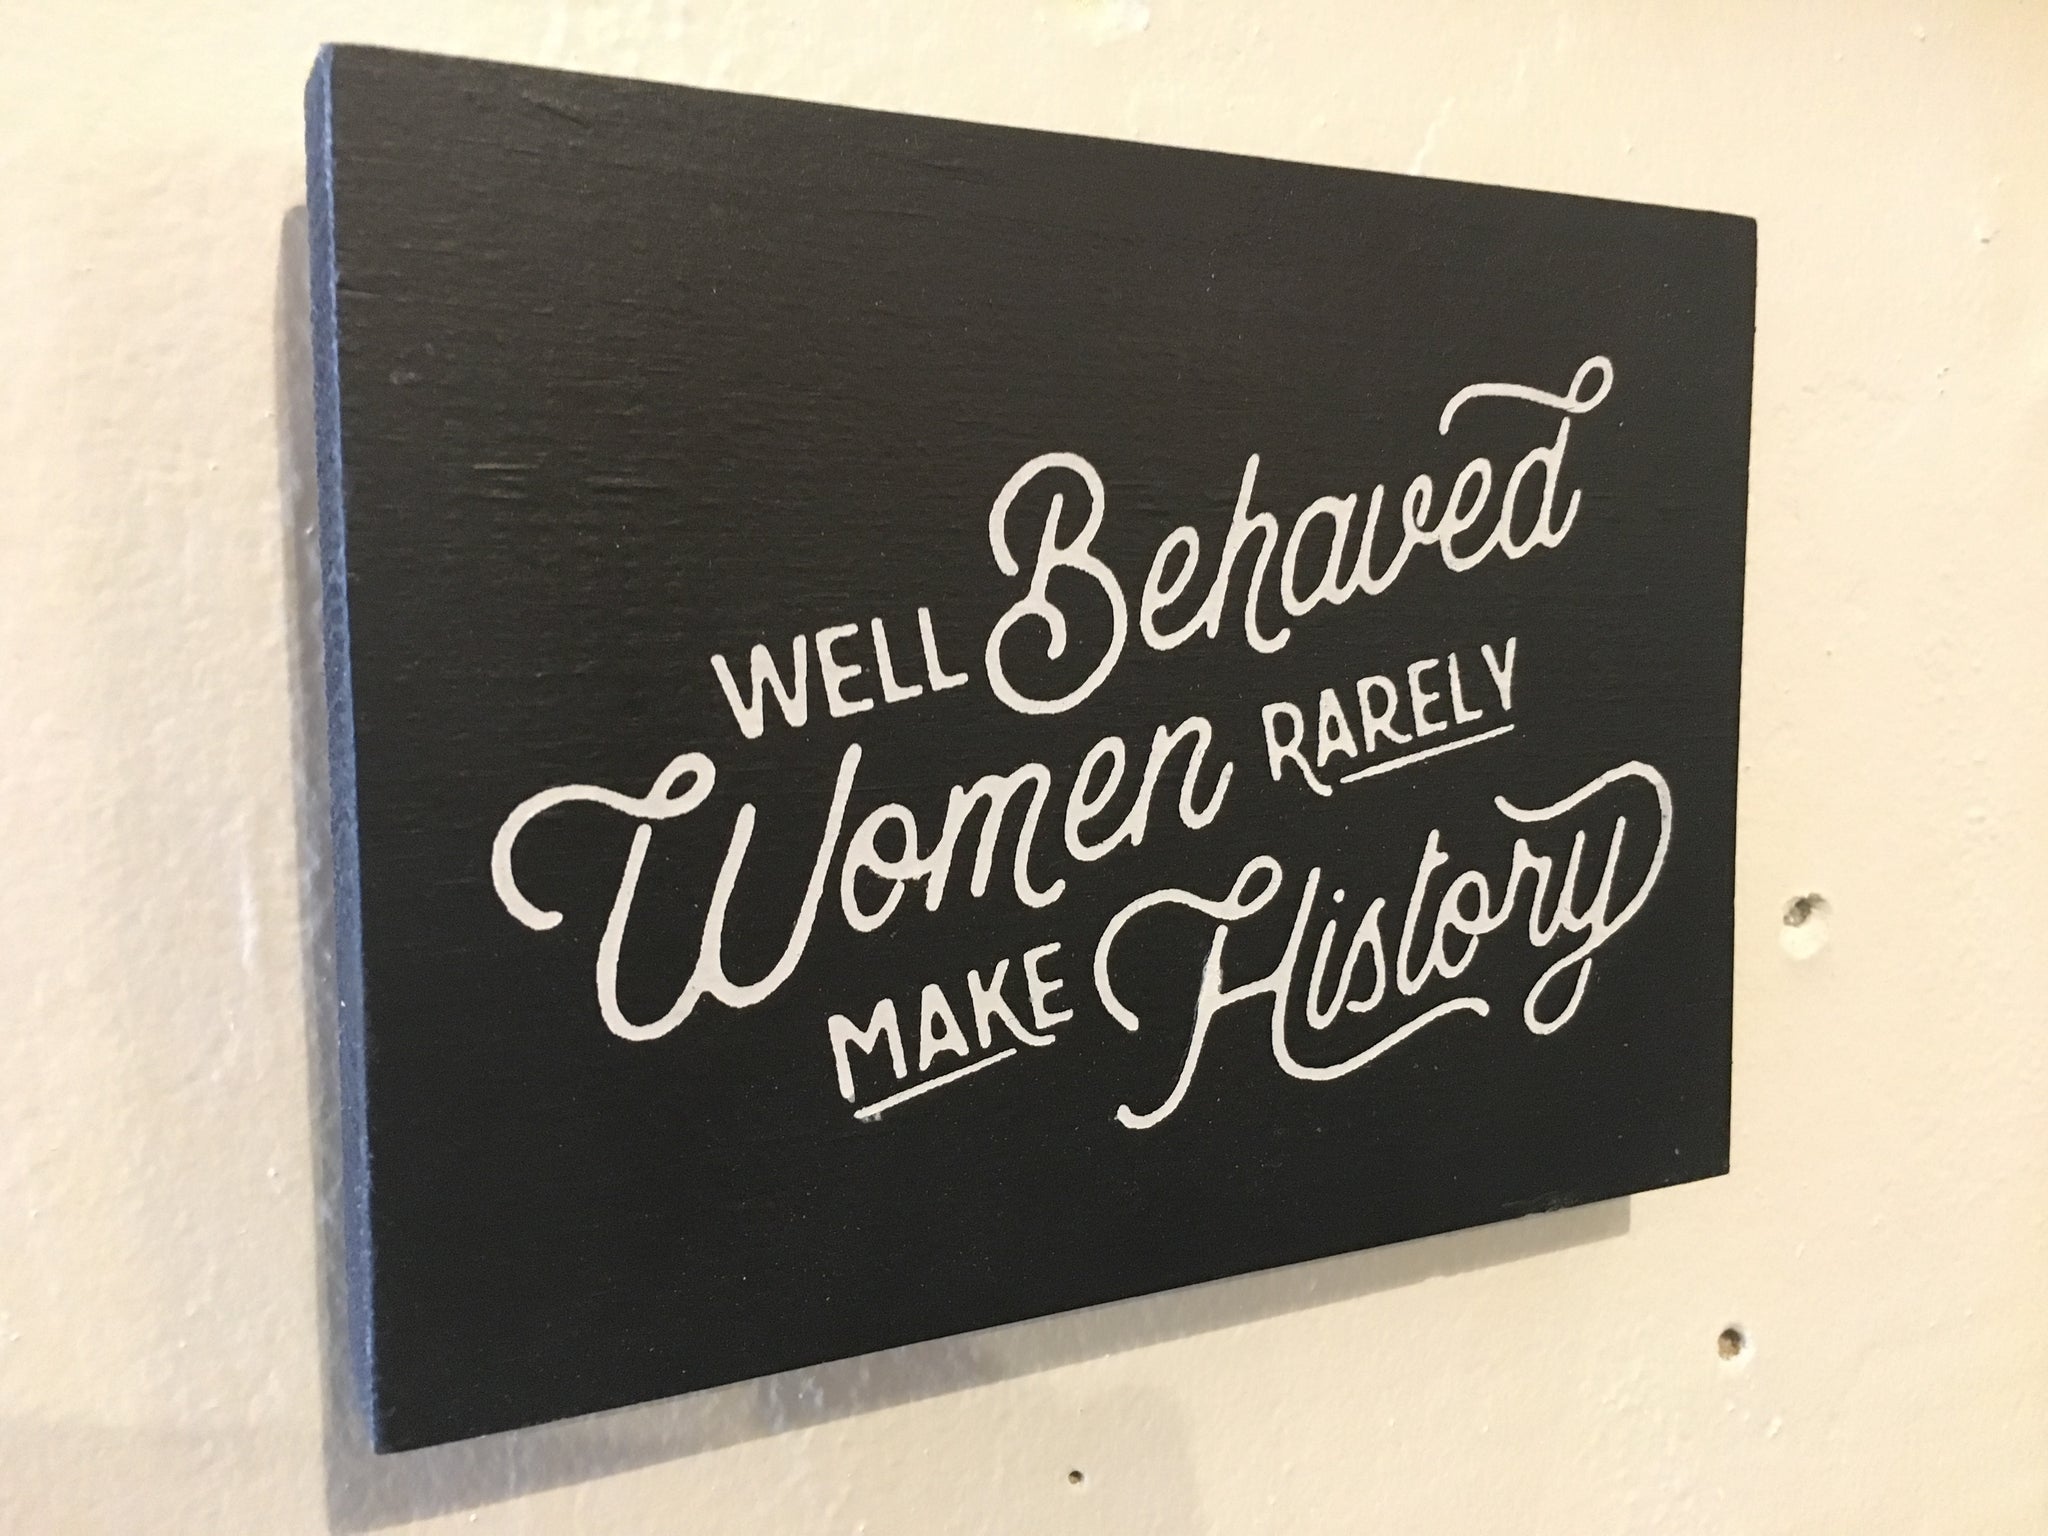 Well Behaved Women Seldom Make History; Women Empowerment Quotes